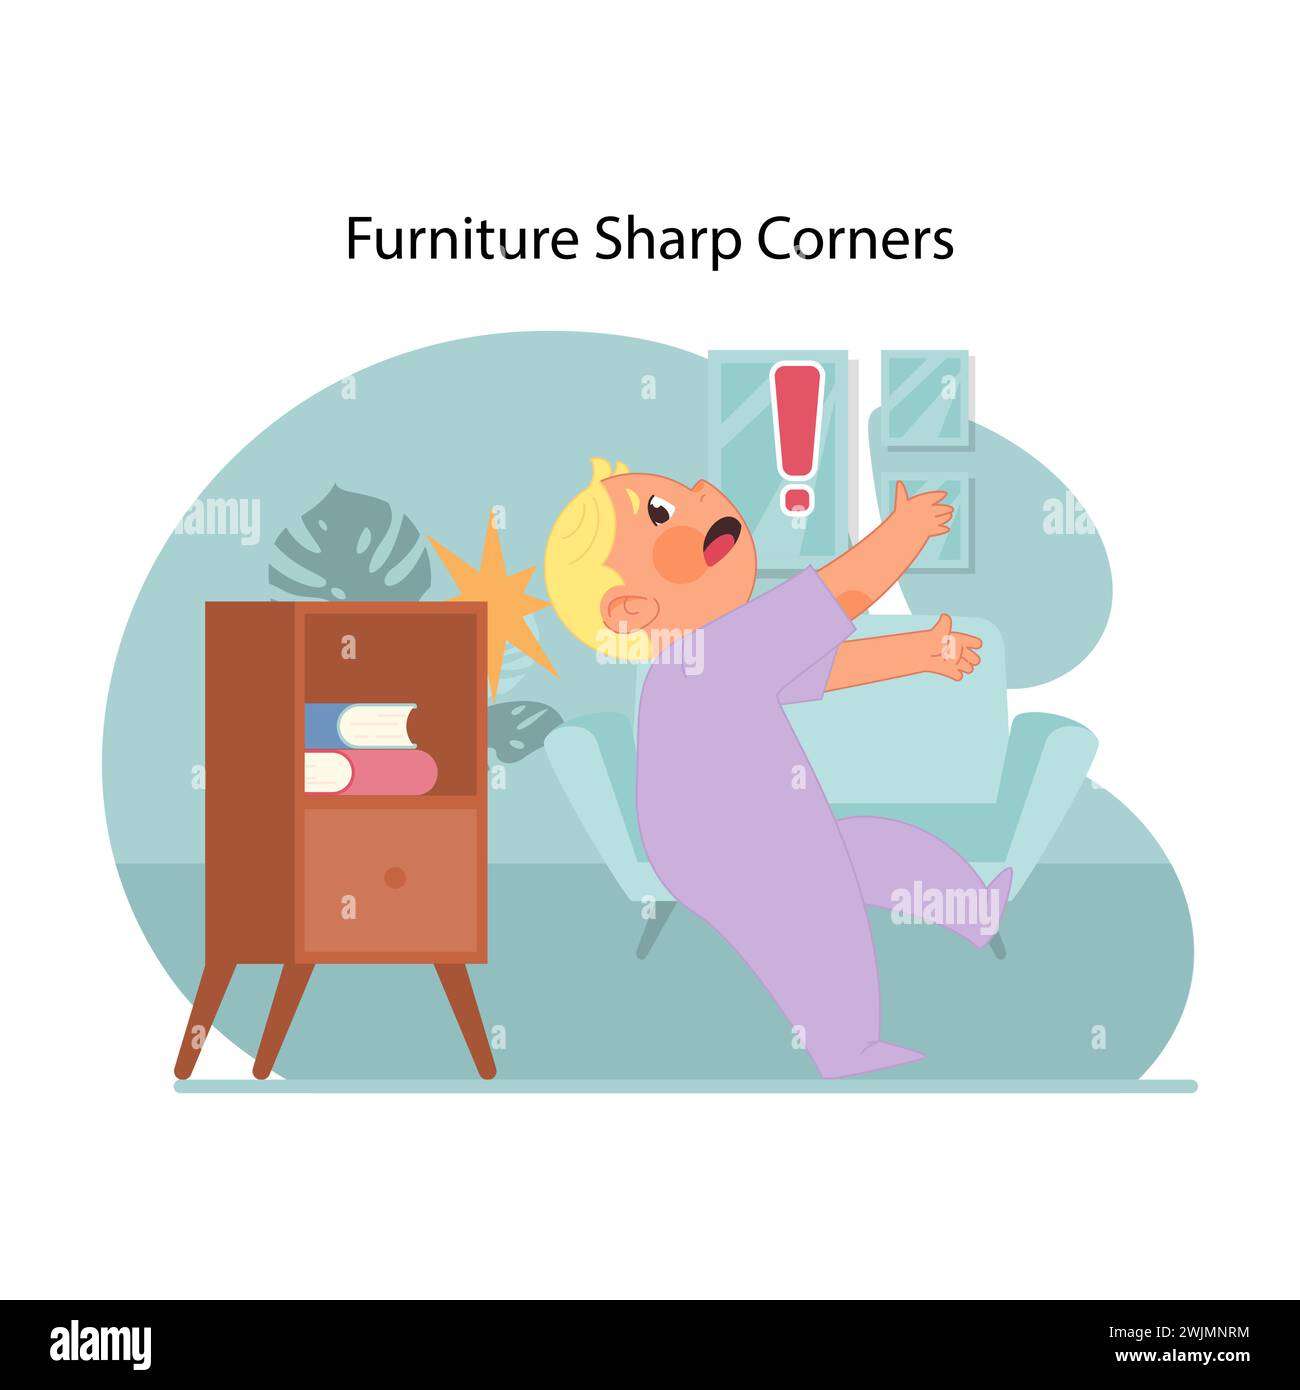 Furniture sharp corners. Toddler shocked, falling on drawer with books inside, risking head injury. Importance of home safety measures. Protecting child from getting hurt. Flat vector illustration Stock Vector